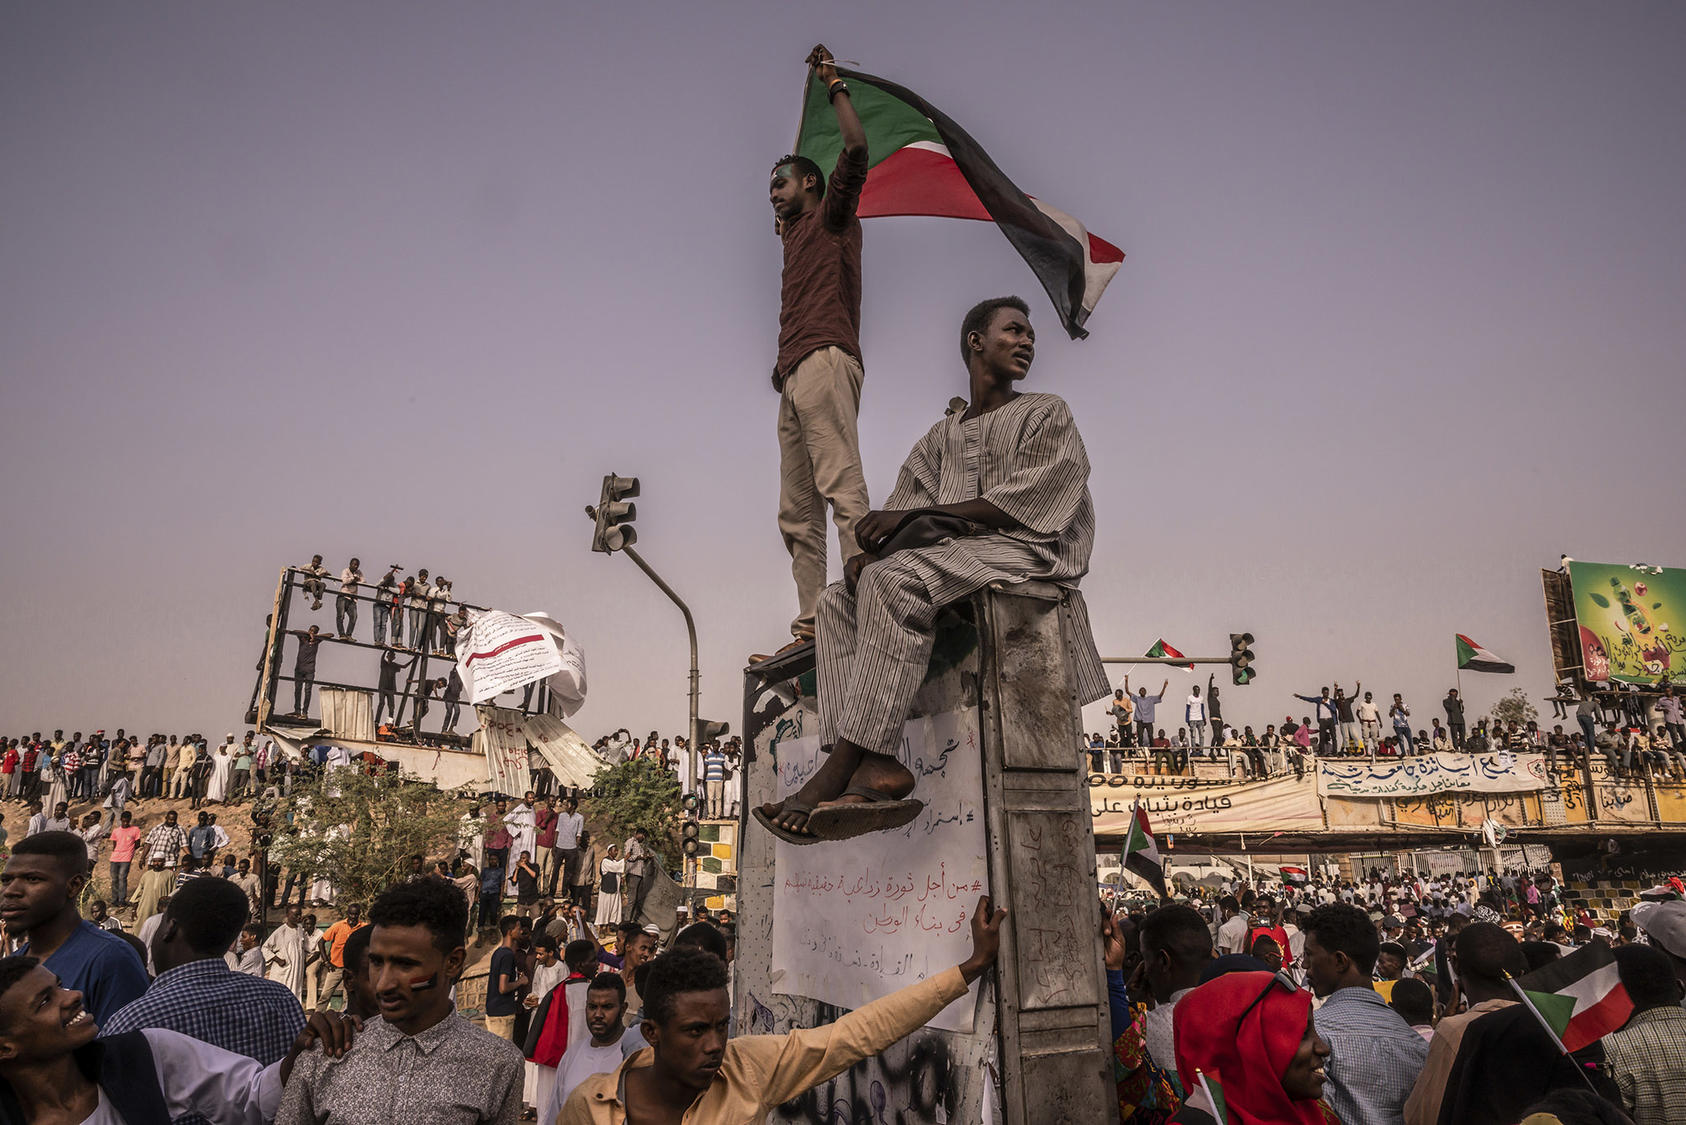 Protesters at the site of a sit-in outside the military headquarters in Khartoum, Sudan, April 19, 2019. (Bryan Denton/The New York Times)